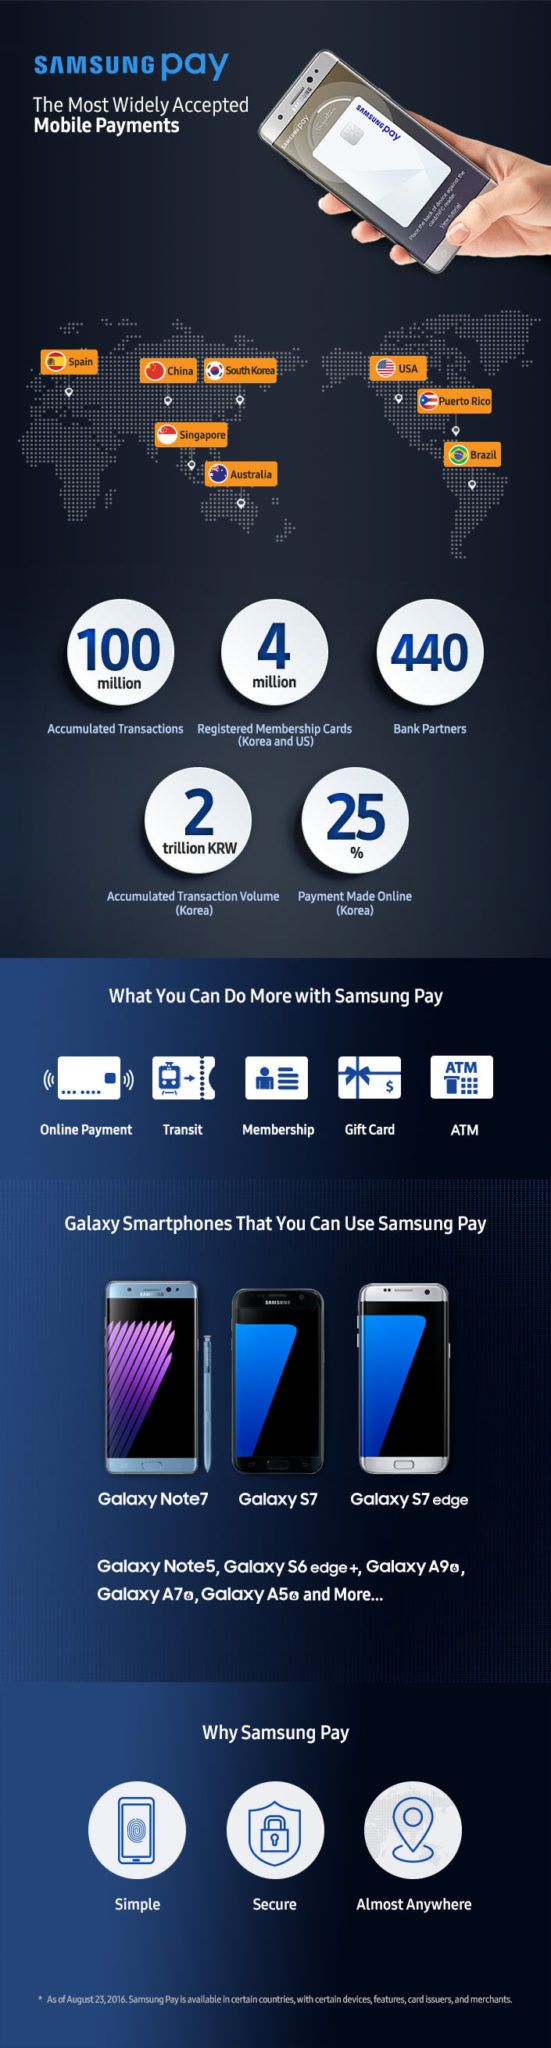 Samsung-Pay-Infographic